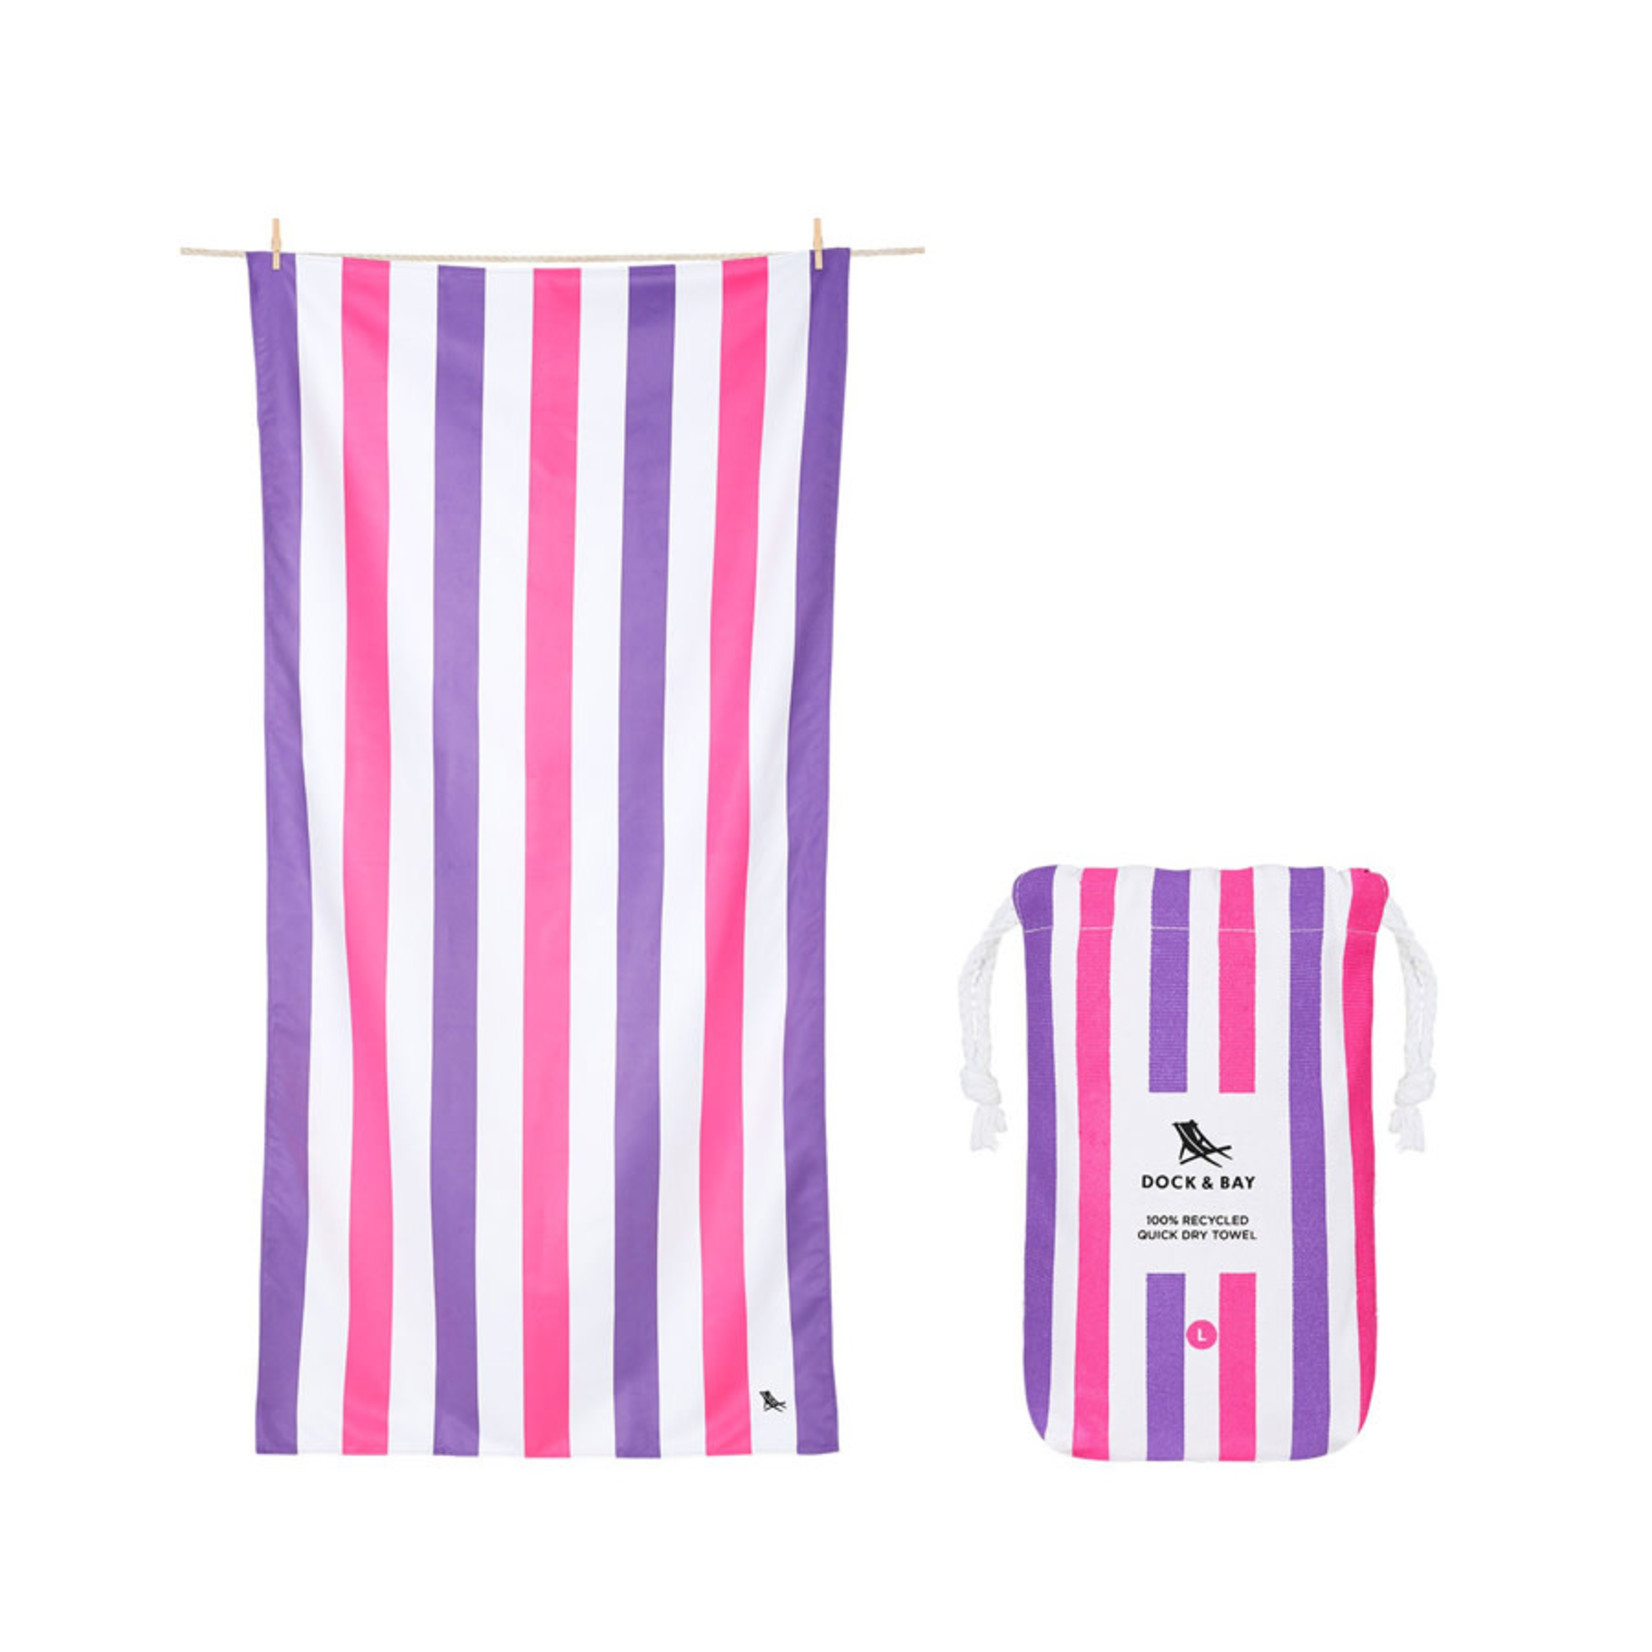 Dock & Bay Quick Dry Beach Towel Summer Collection